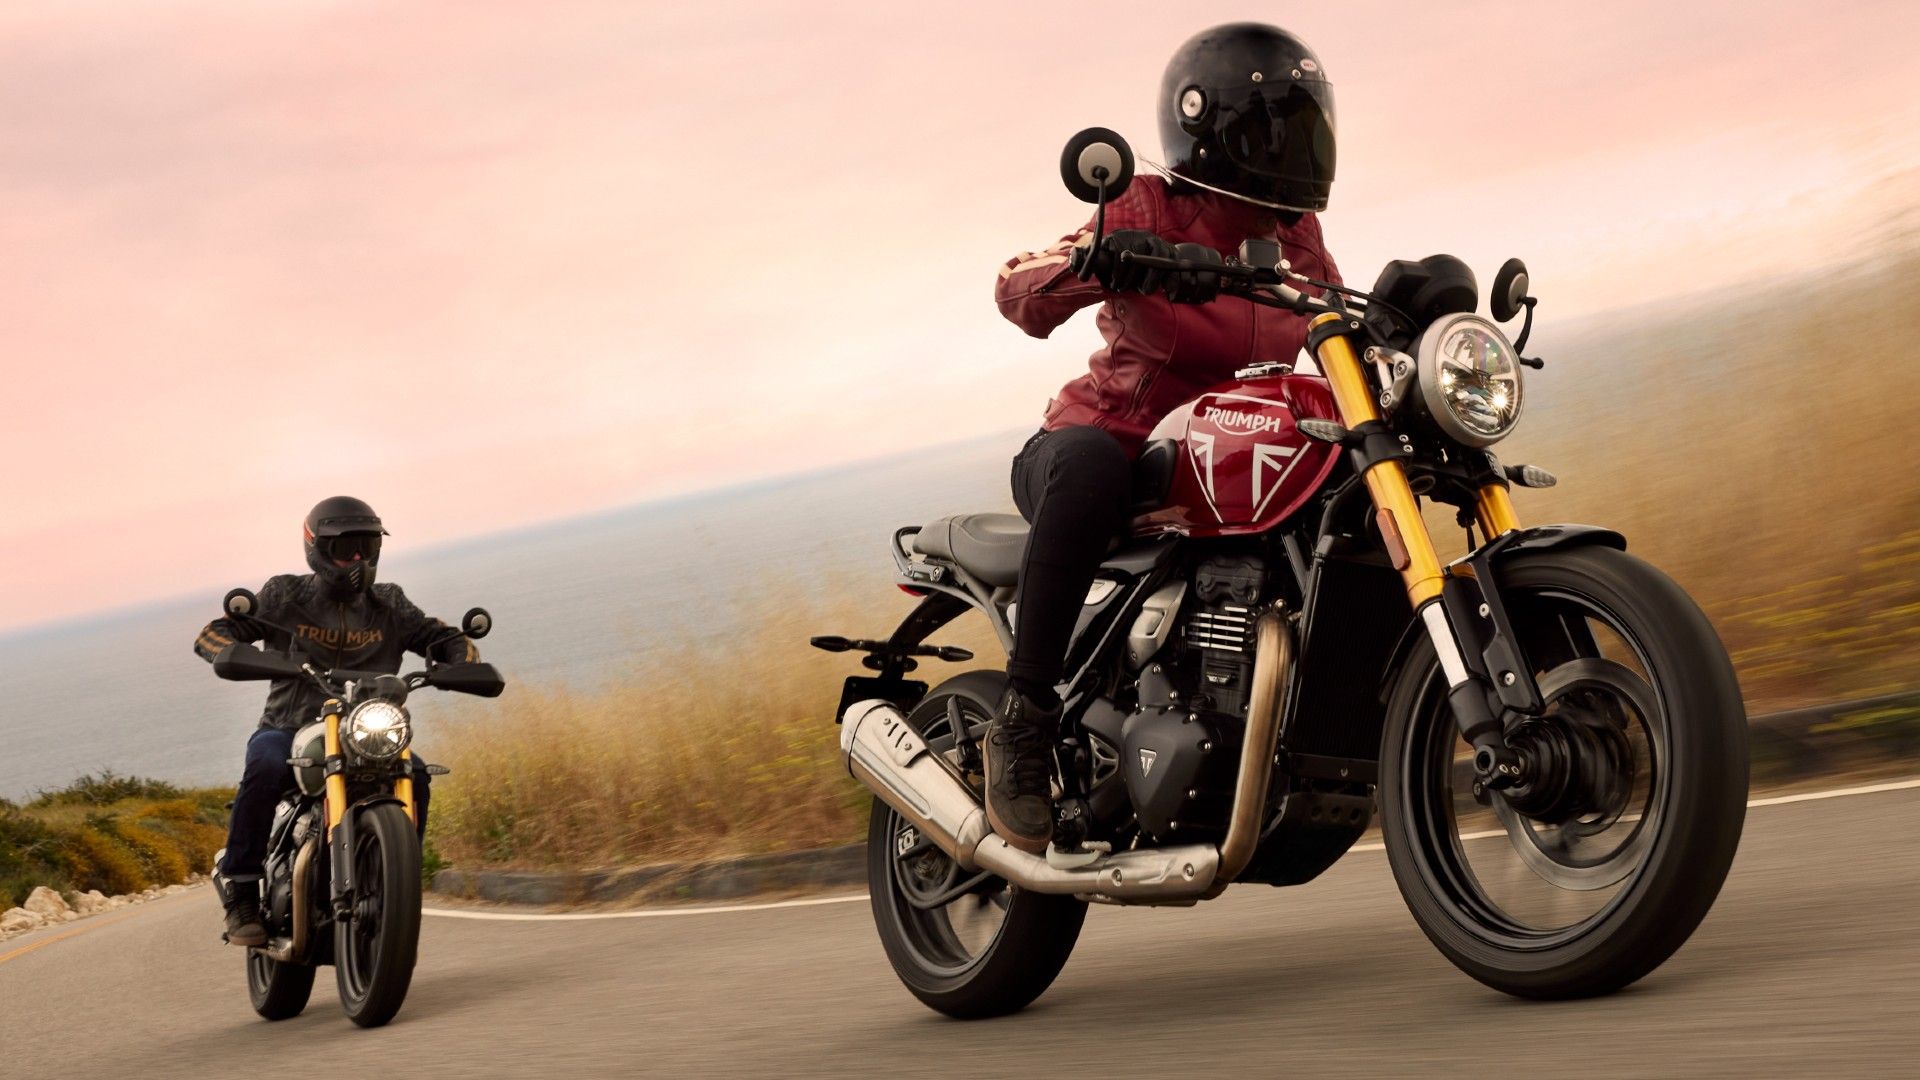 2024 Triumph Speed 400 And Scrambler 400 Are Here To Disrupt The Entry Level Segment